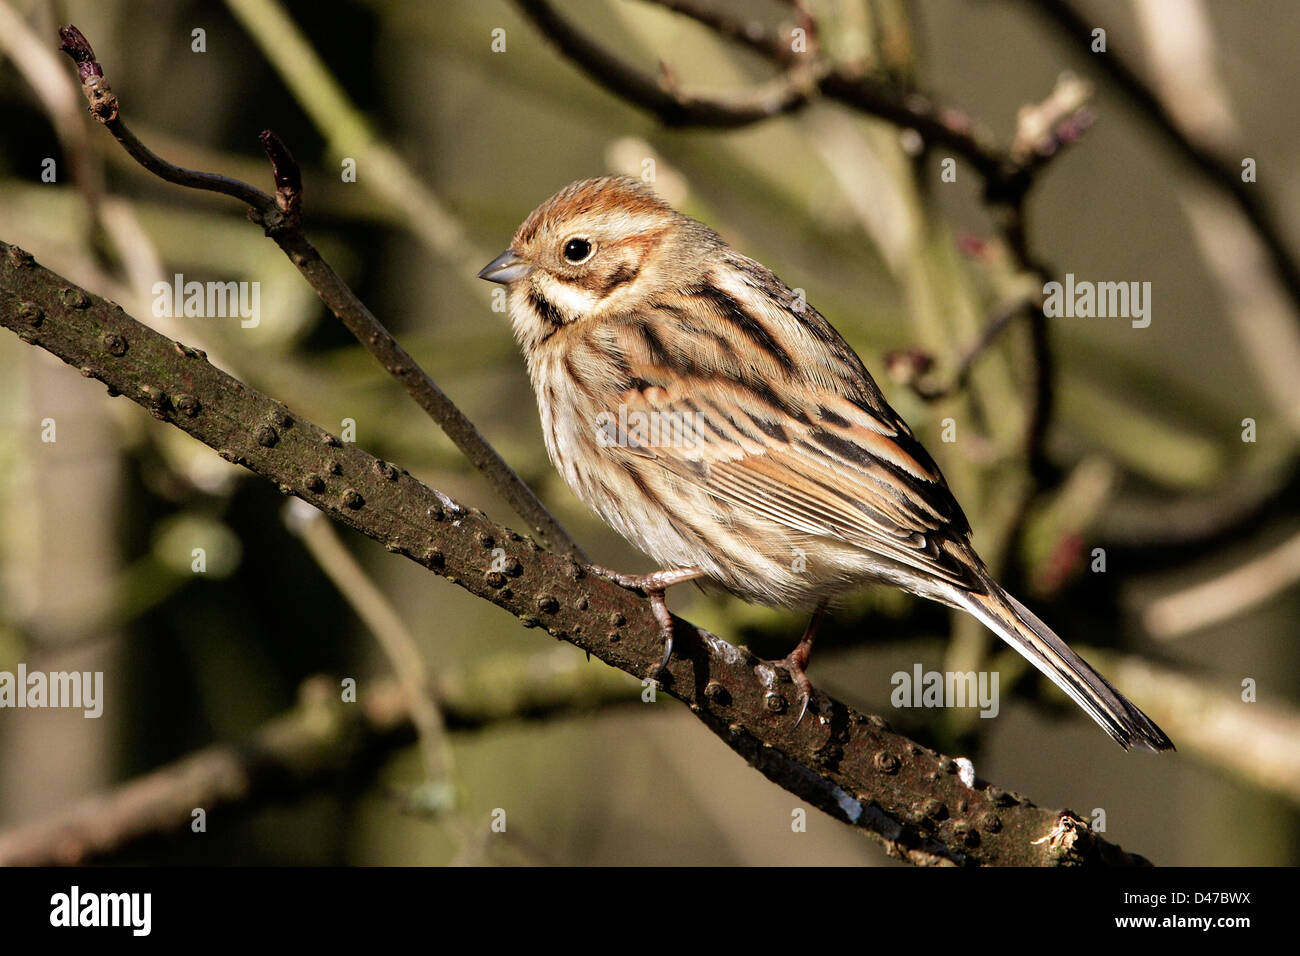 A Female Reed Bunting (Emberiza schoeniclus) perched openly on a tree branch. Stock Photo